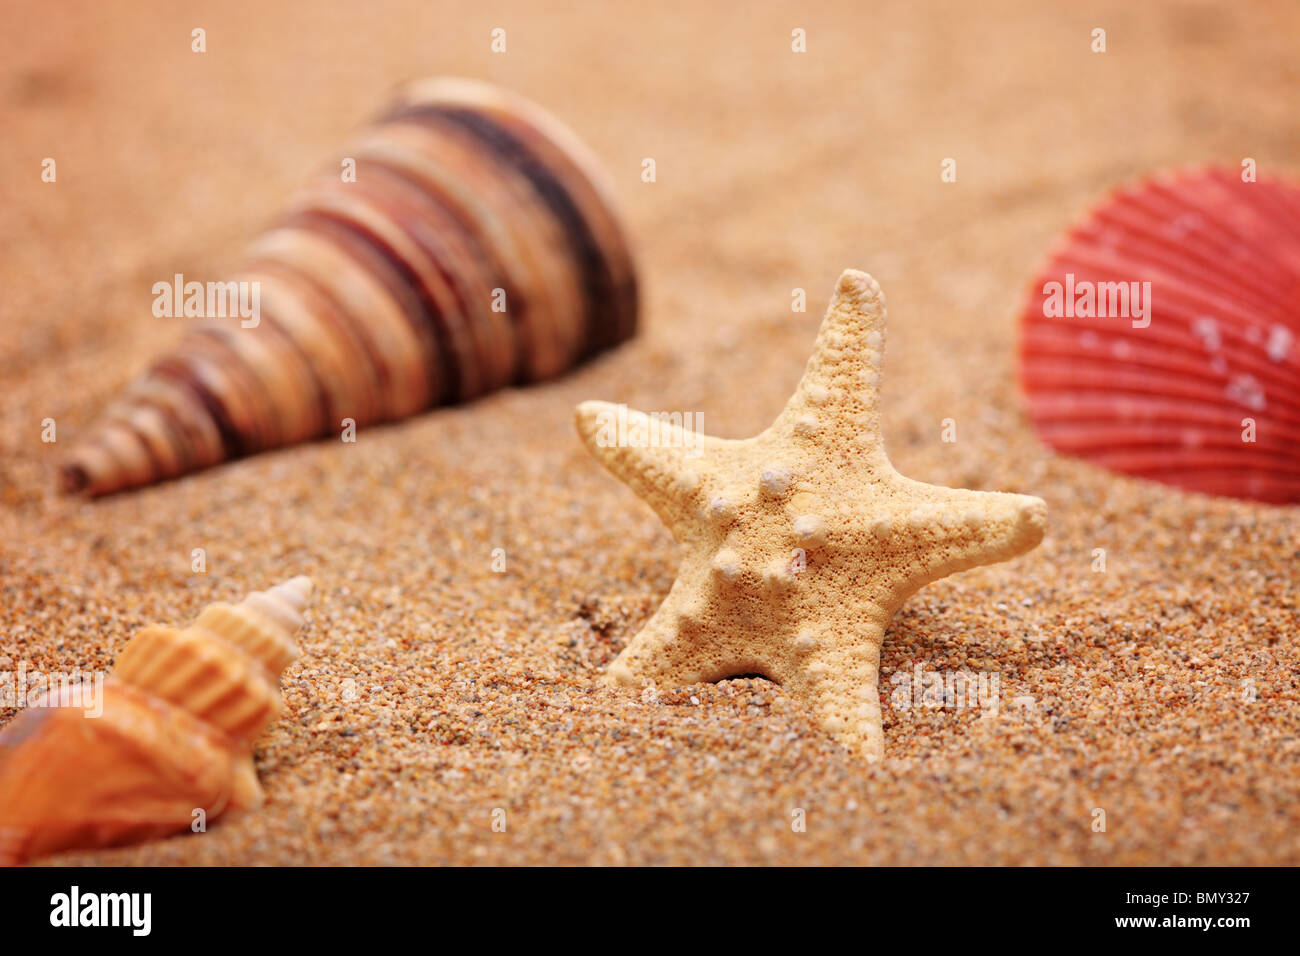 Beach sand with sea shell and star fish Stock Photo